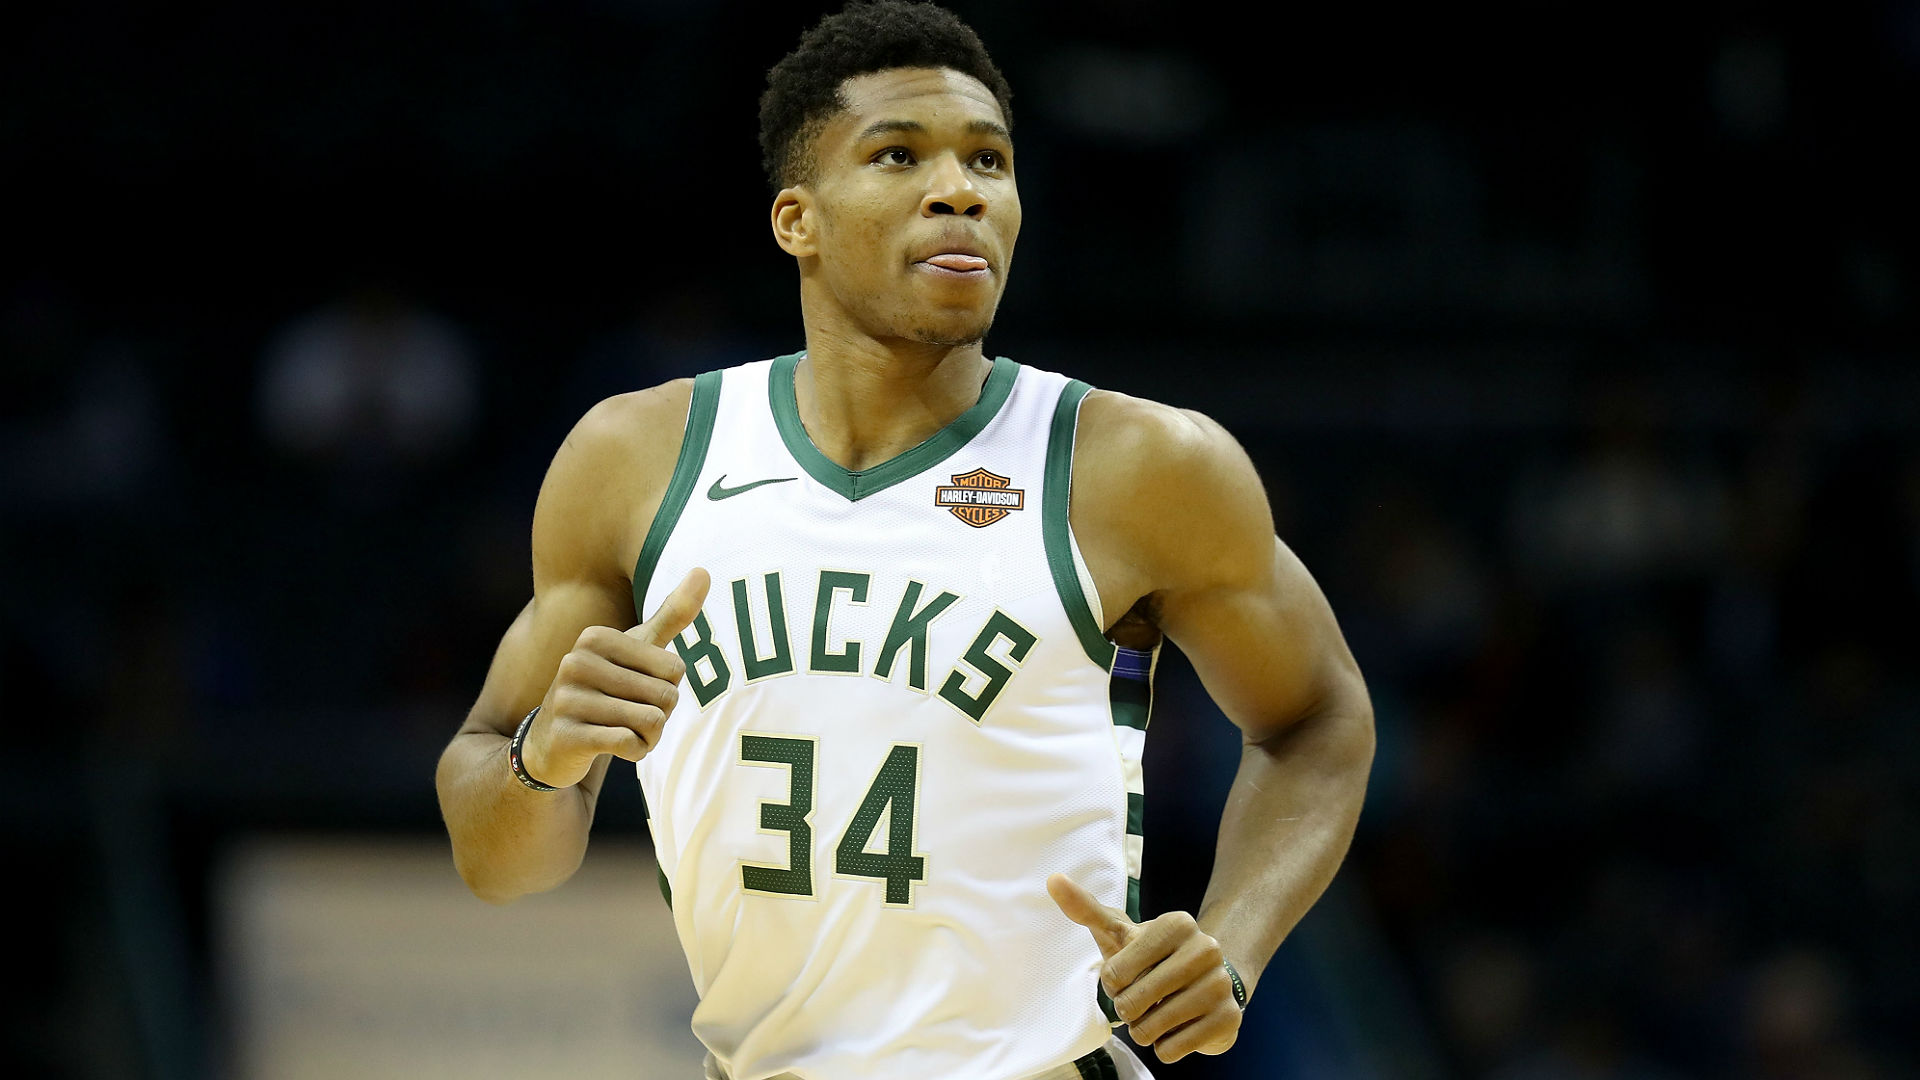 After shining again for the Milwaukee Bucks, Giannis Antetokounmpo insisted it takes more than one player to slow him down in the NBA.